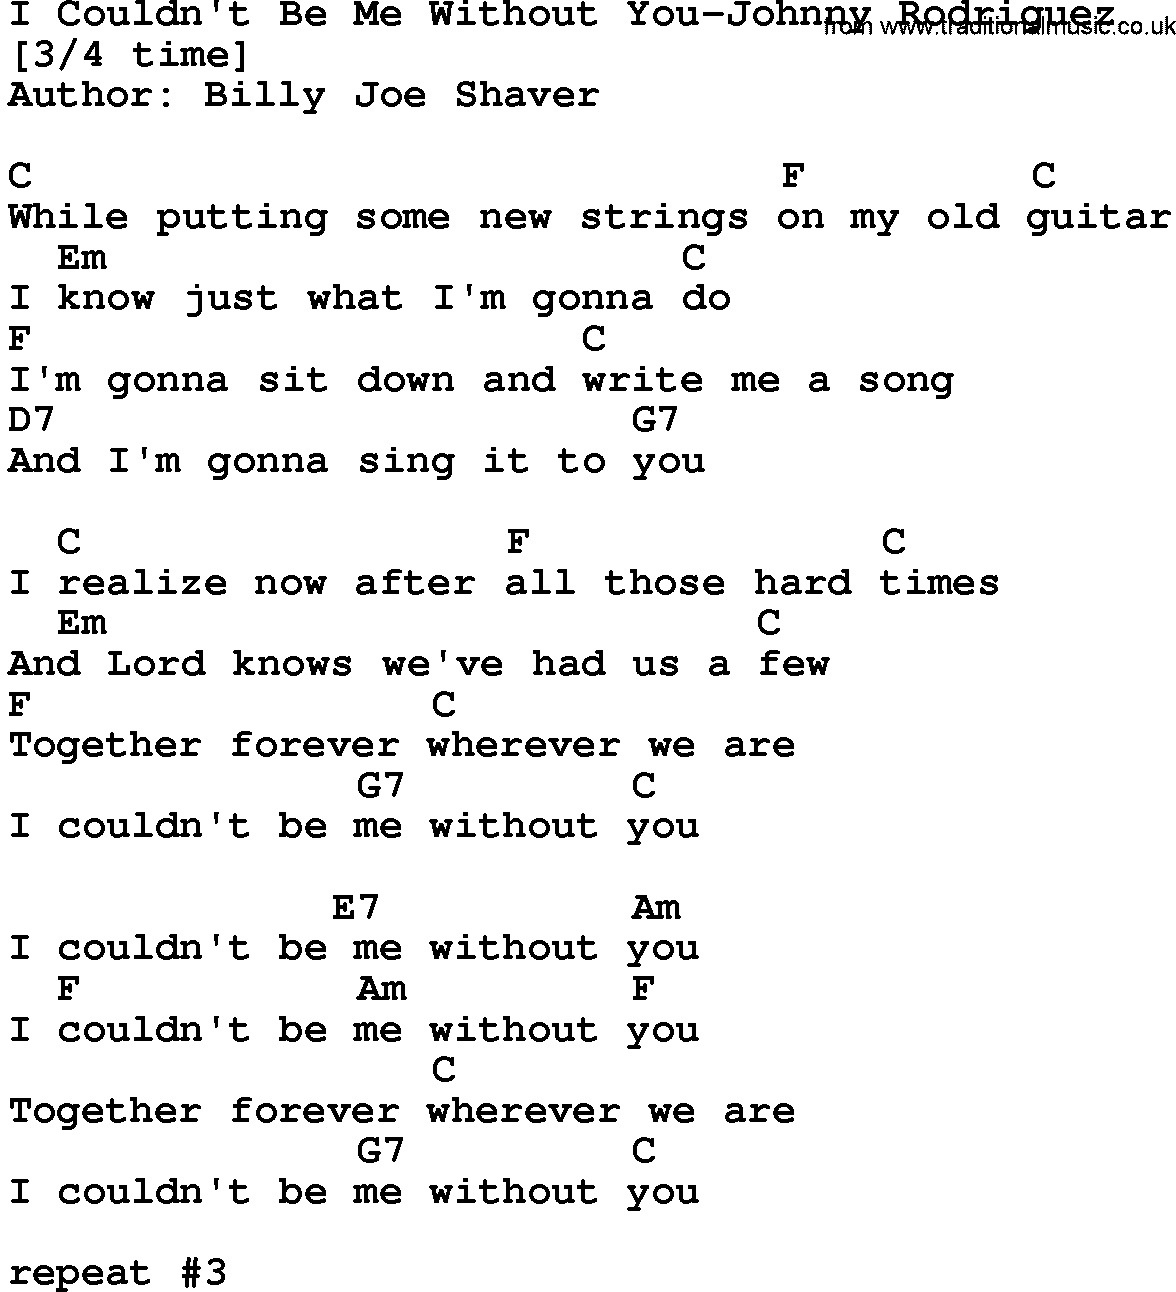 Country music song: I Couldn't Be Me Without You-Johnny Rodriguez lyrics and chords